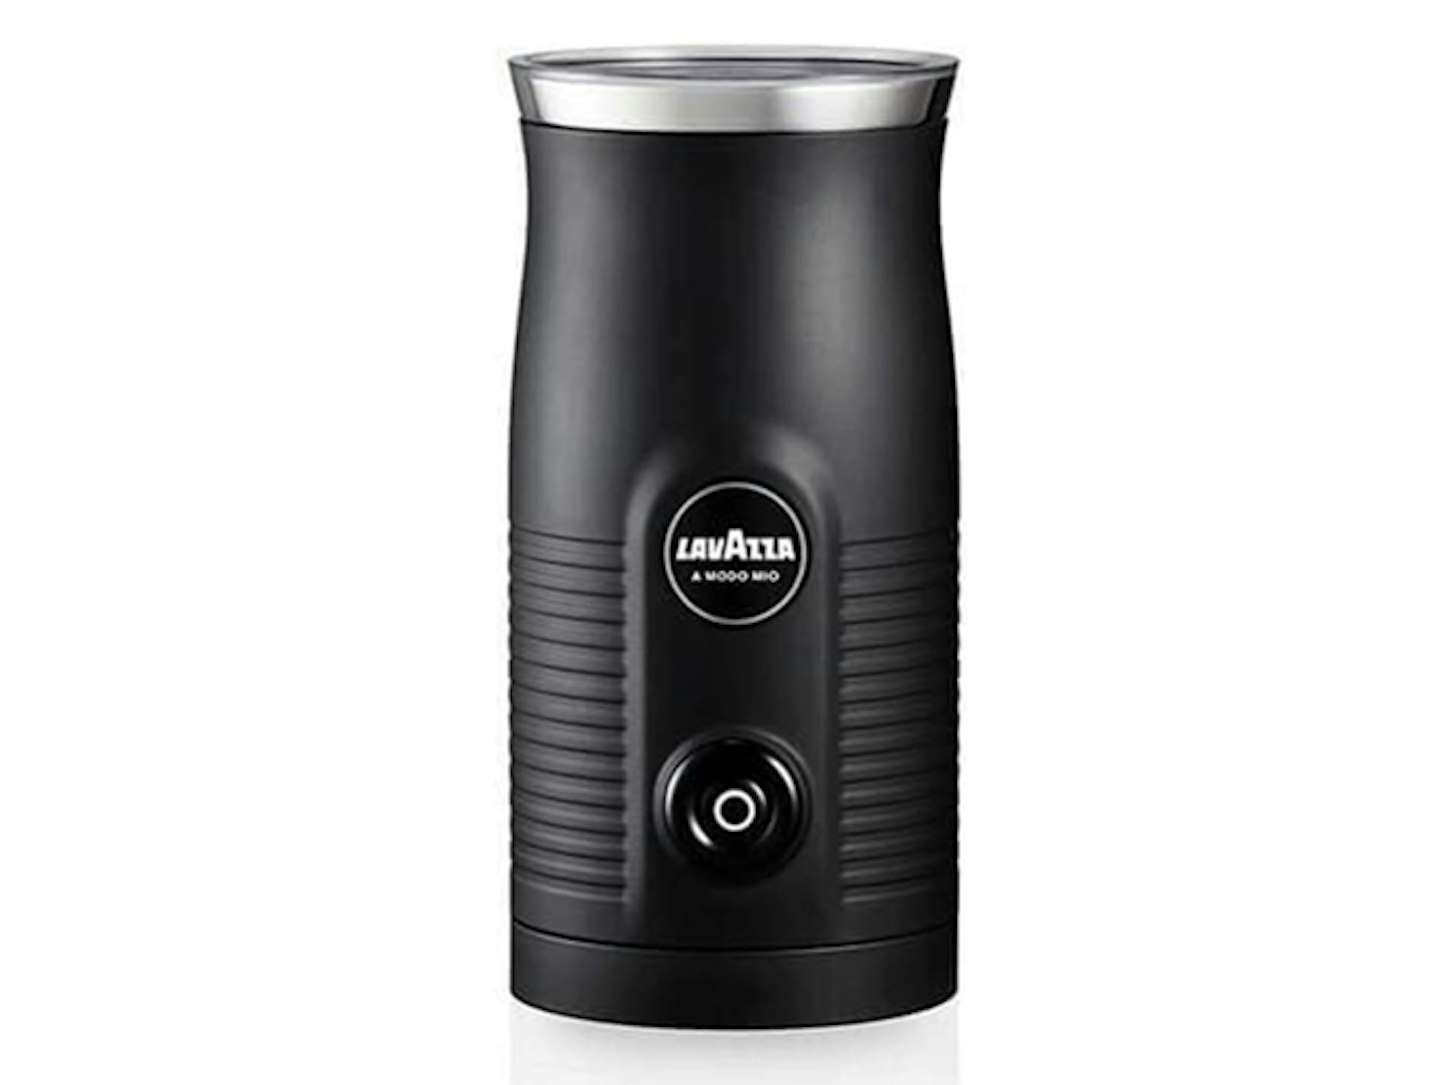 https://images.bauerhosting.com/legacy/media/6140/6cfb/f234/ff00/4168/0909/Lavazza%20A%20Modo%20Mio%20Milk%20Easy%20Frother.PNG?auto=format&w=1440&q=80